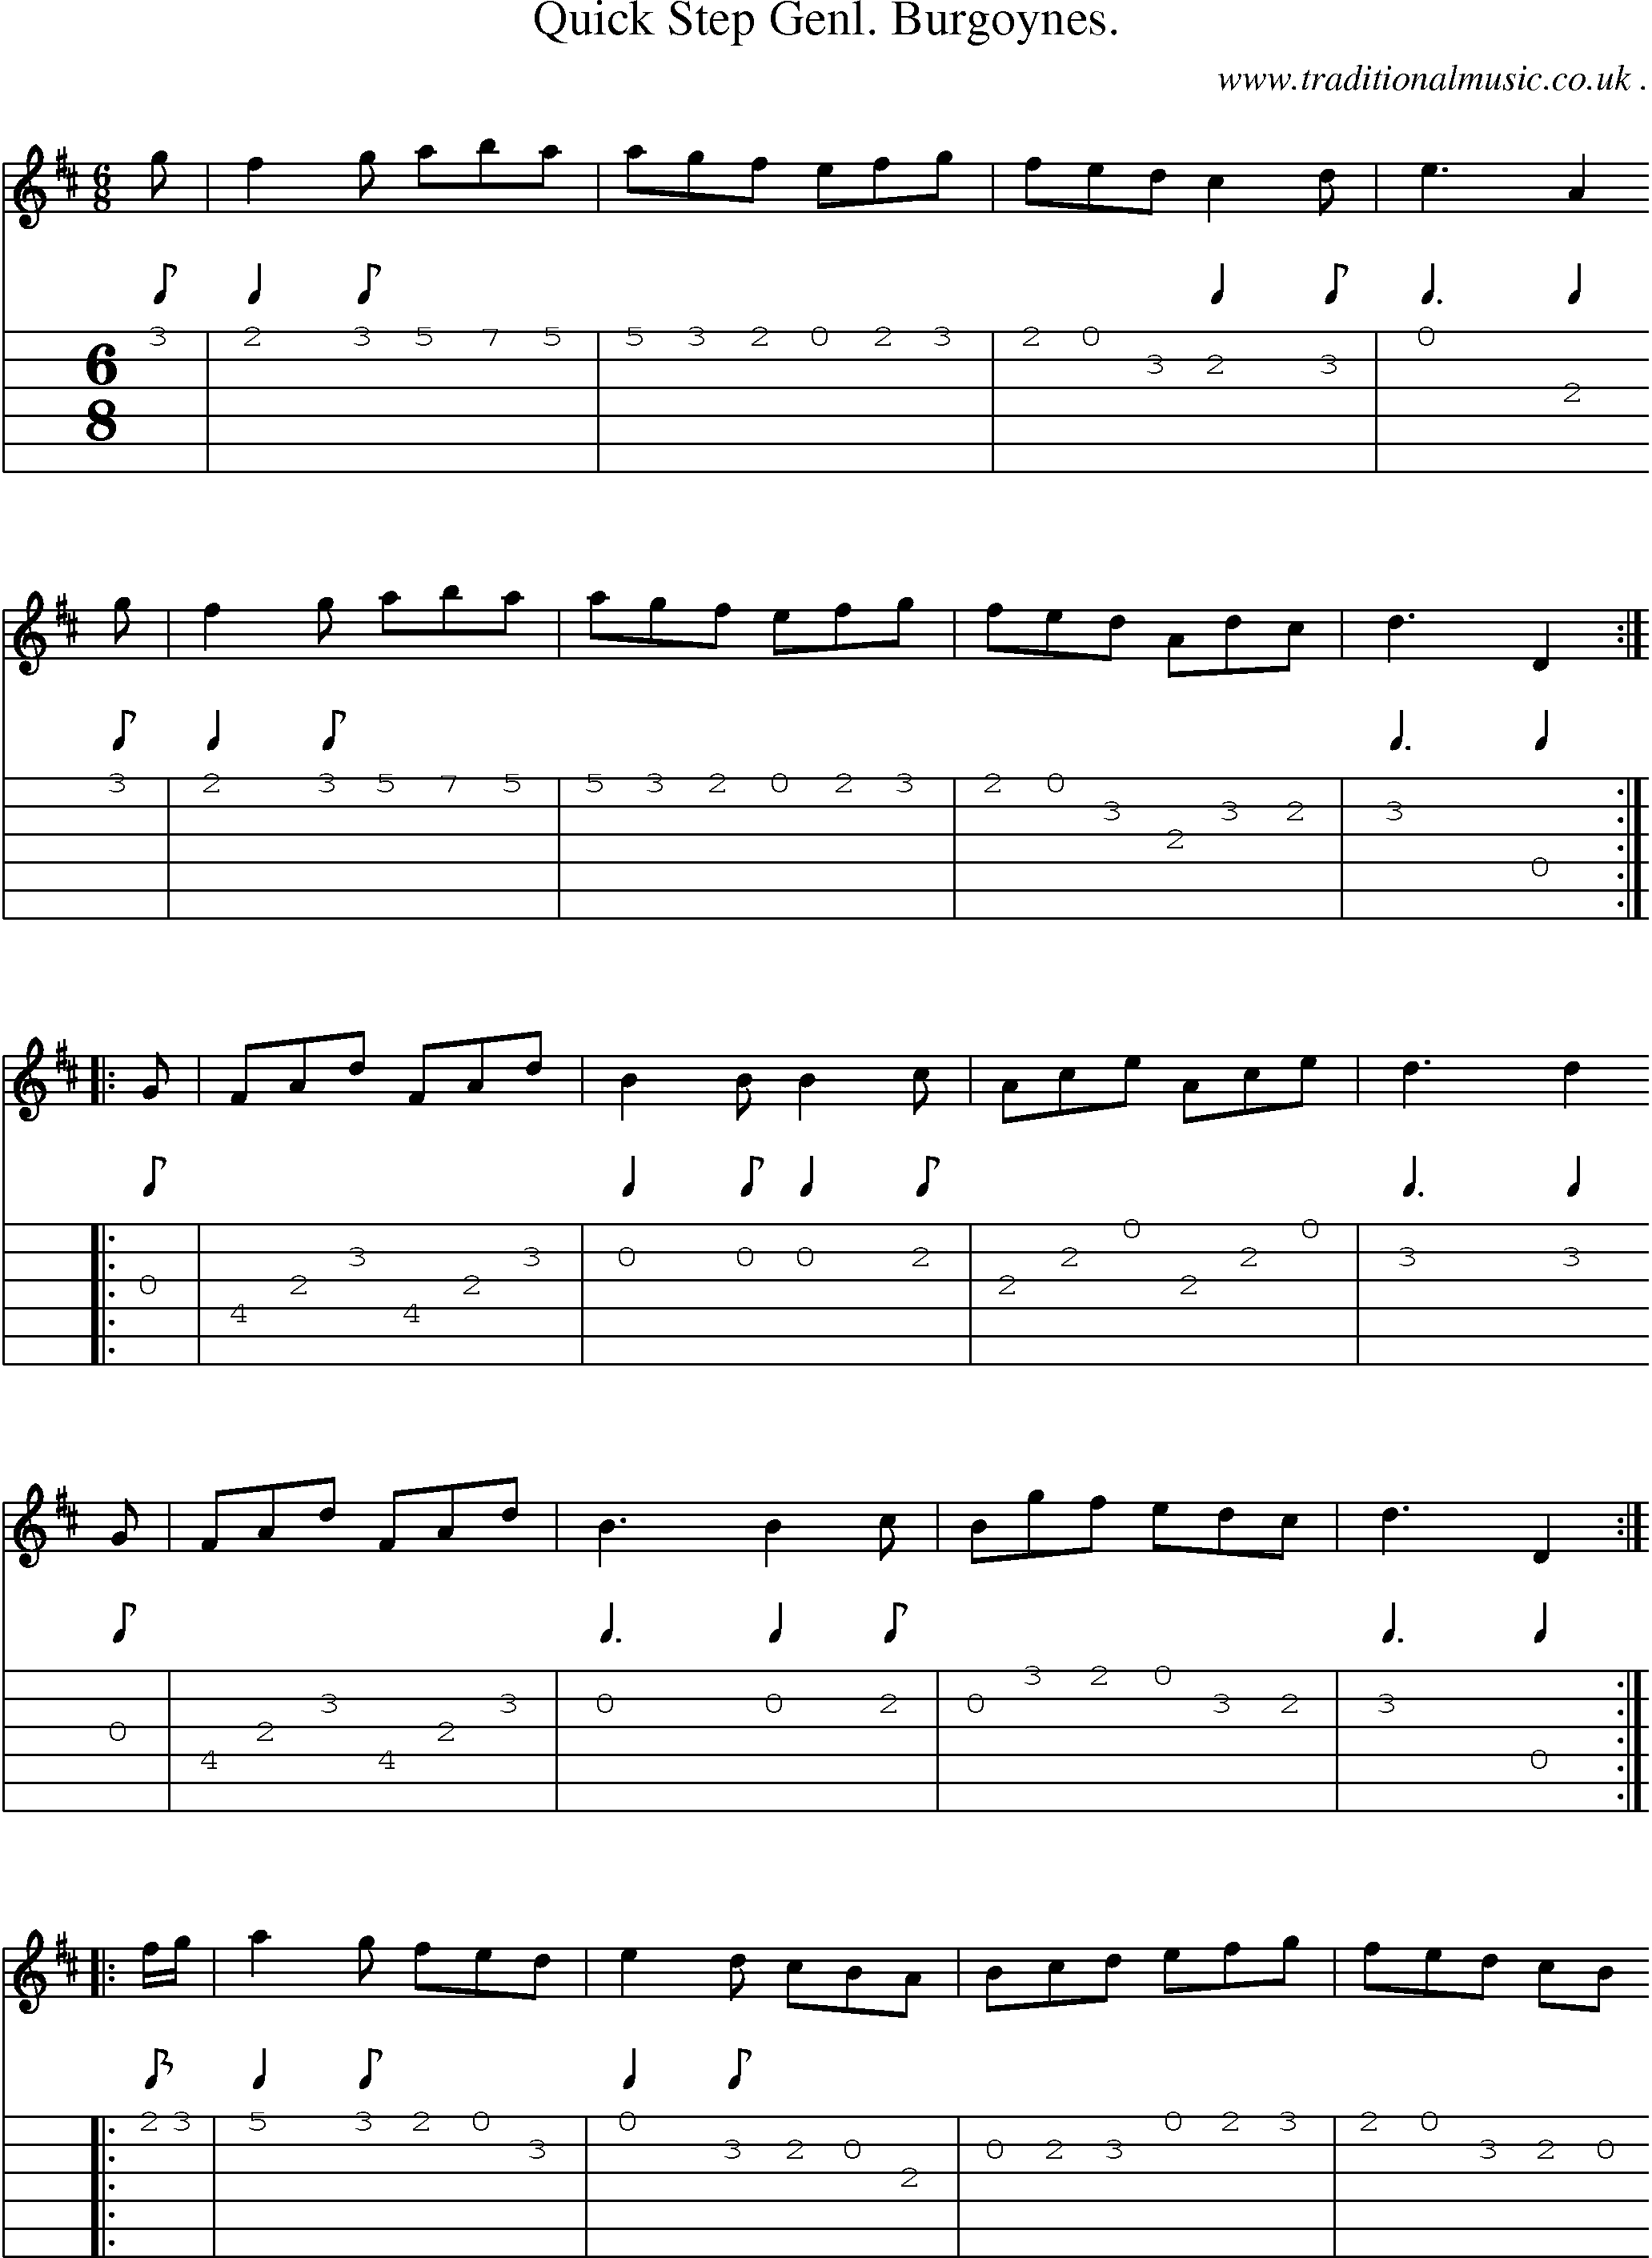 Sheet-Music and Guitar Tabs for Quick Step Genl Burgoynes